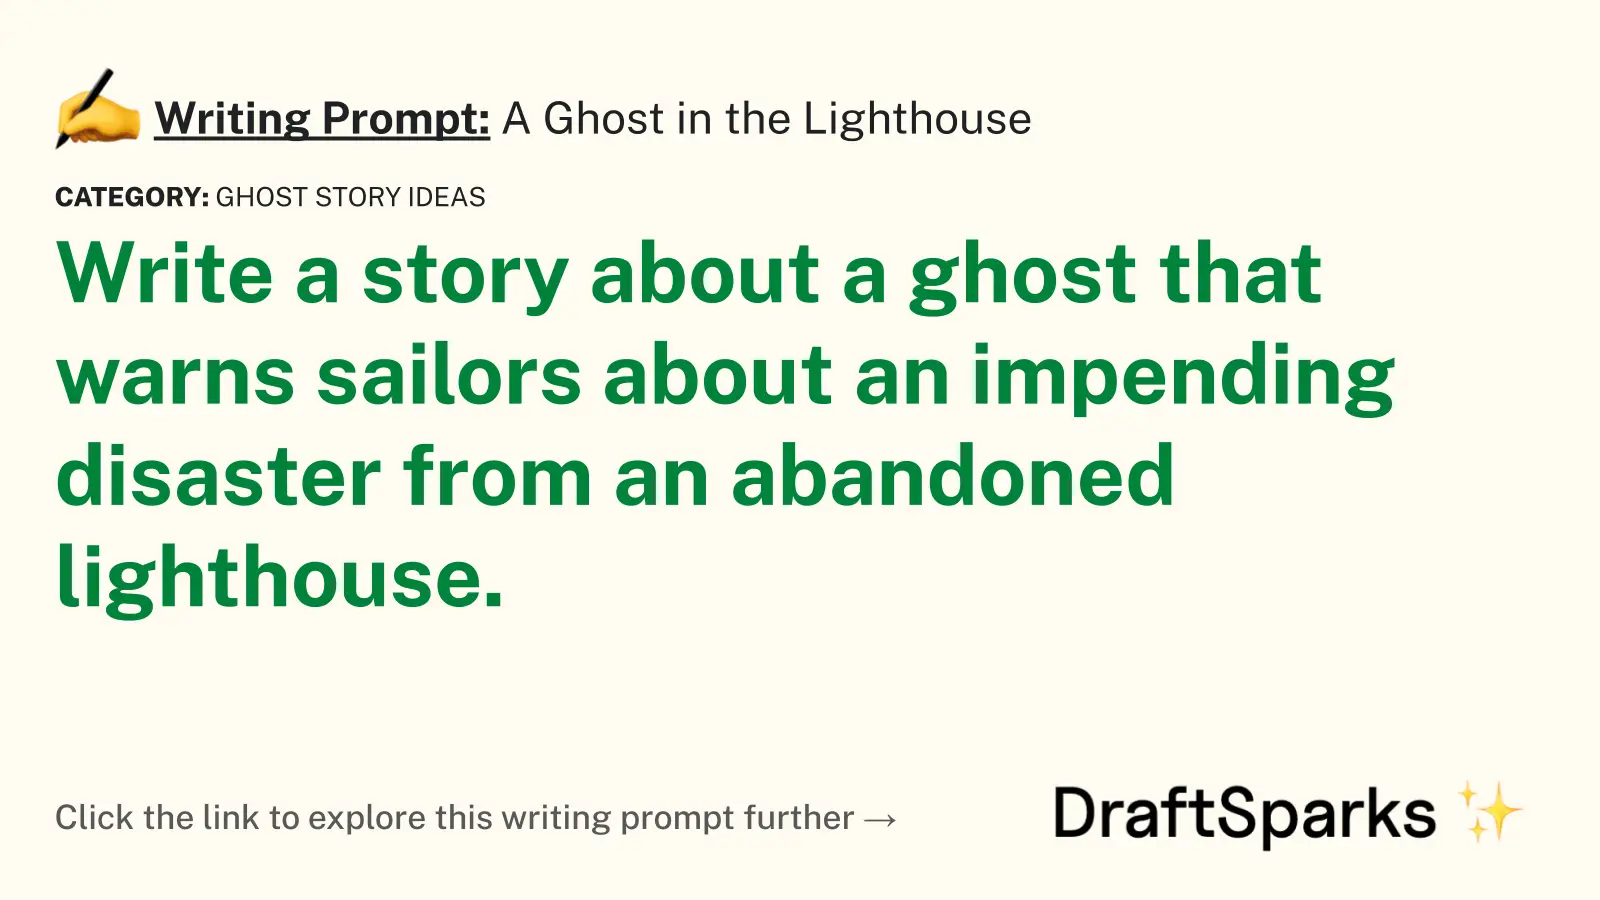 A Ghost in the Lighthouse